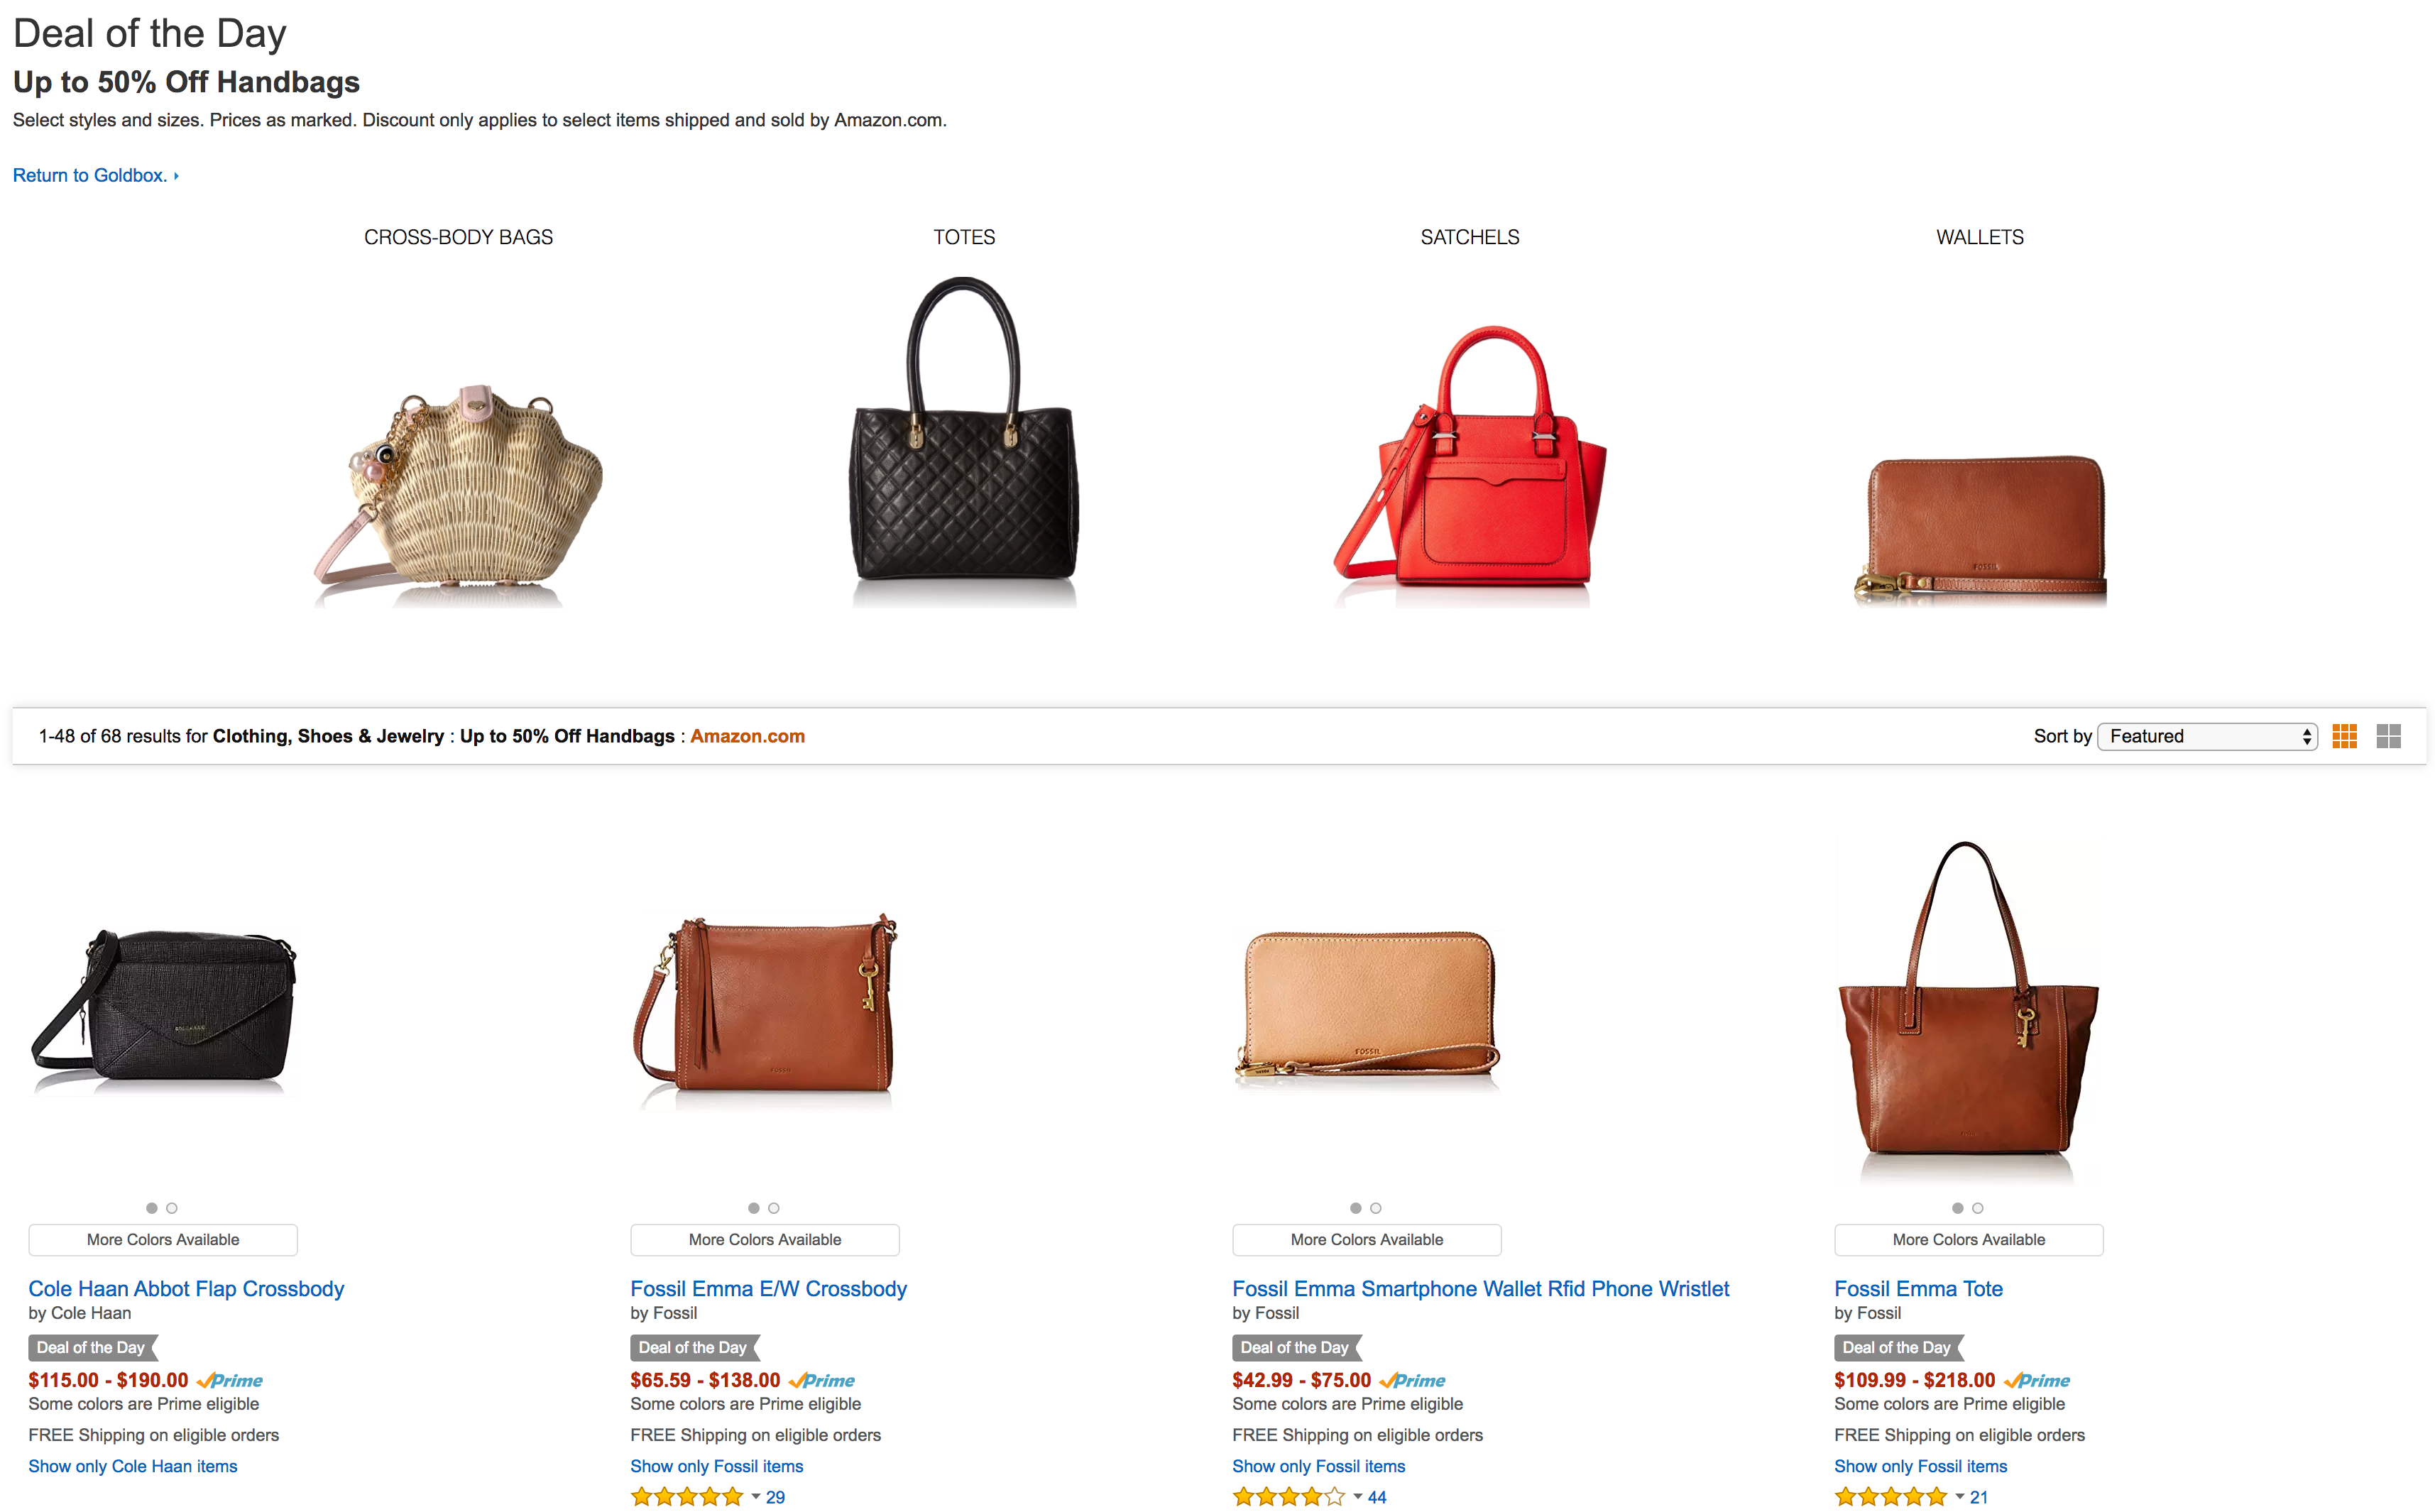 Cole Haan, Fossil and more handbags/wallets up to 50% off on Amazon